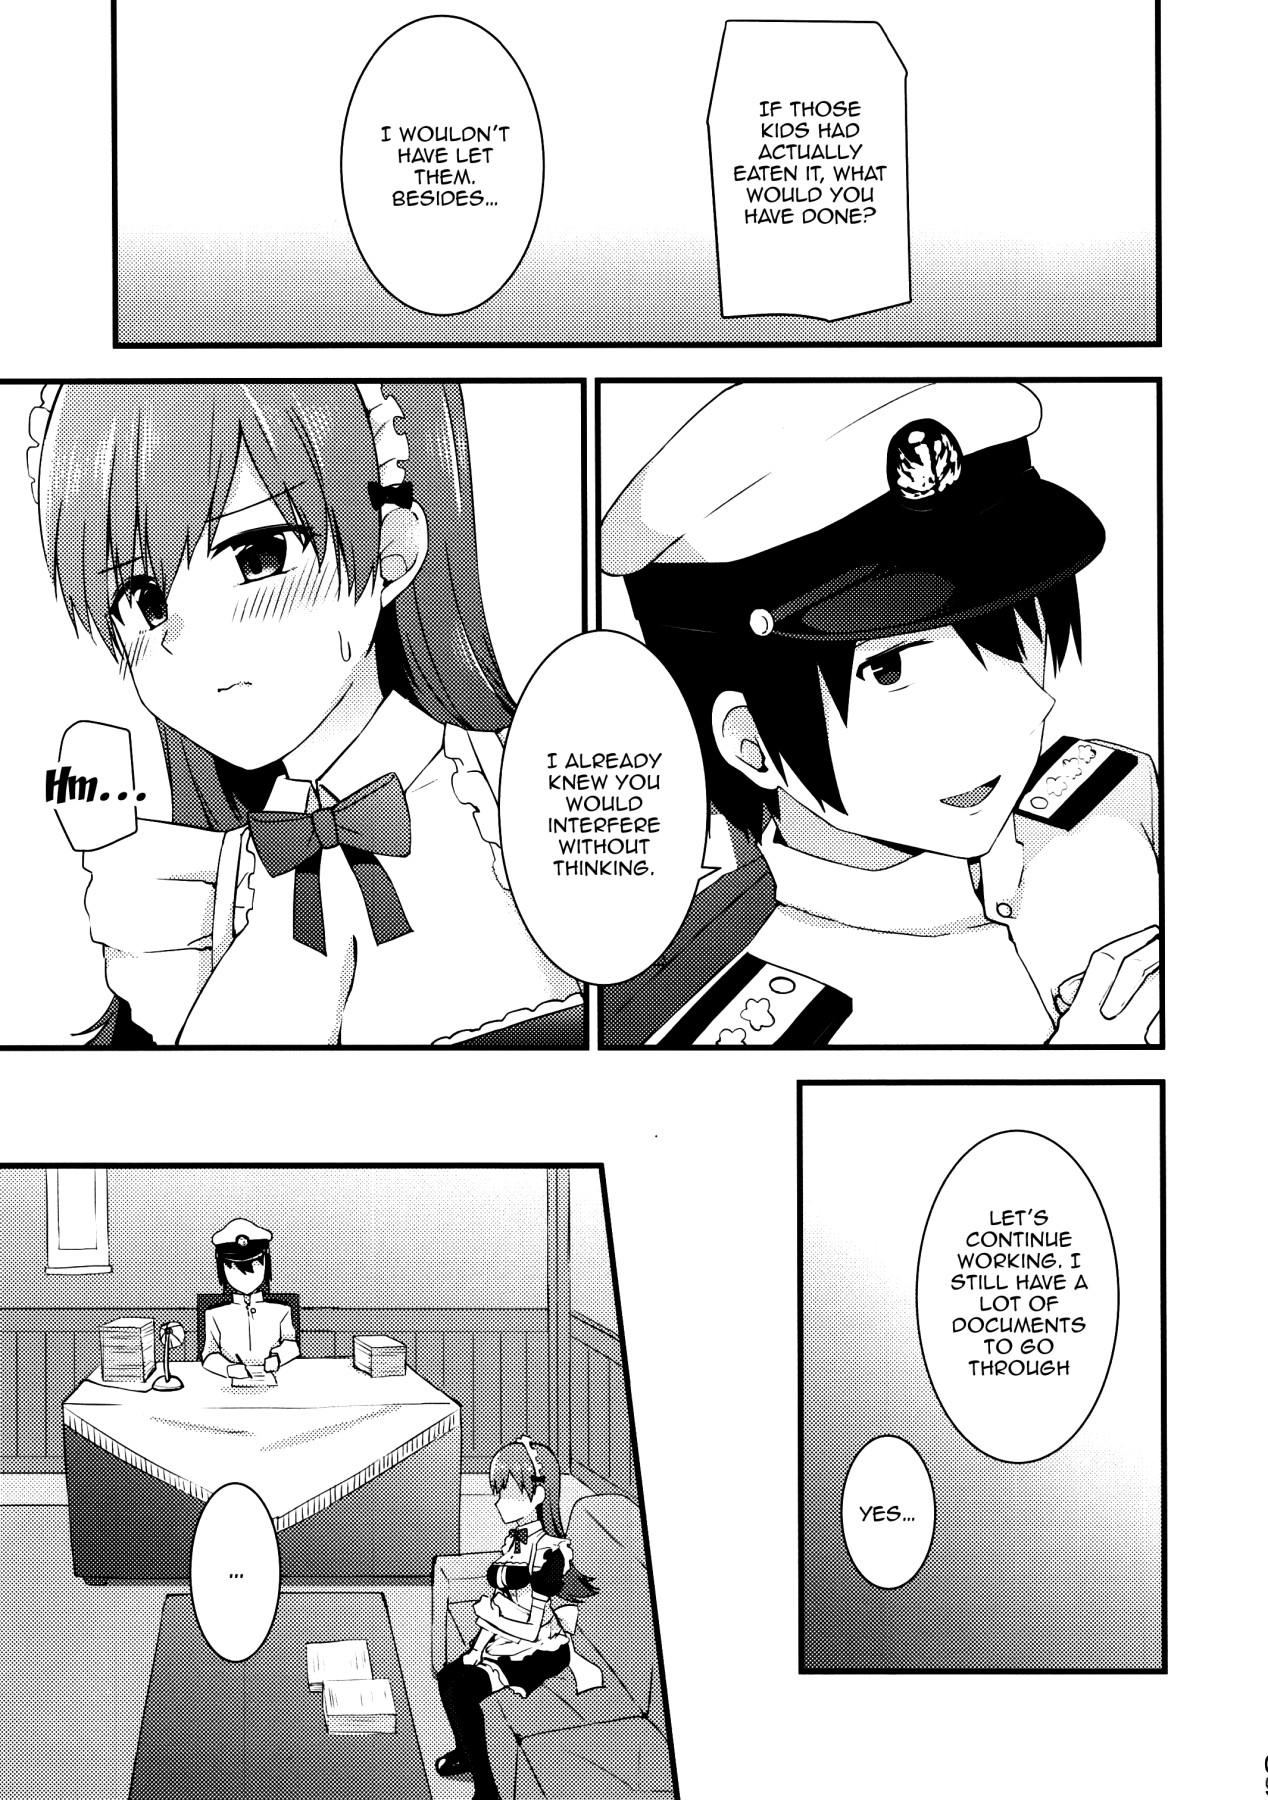 Skype Ooi! Maid Fuku o Kite miyou! | Ooi! Try On These Maid Clothes! - Kantai collection Internal - Page 10